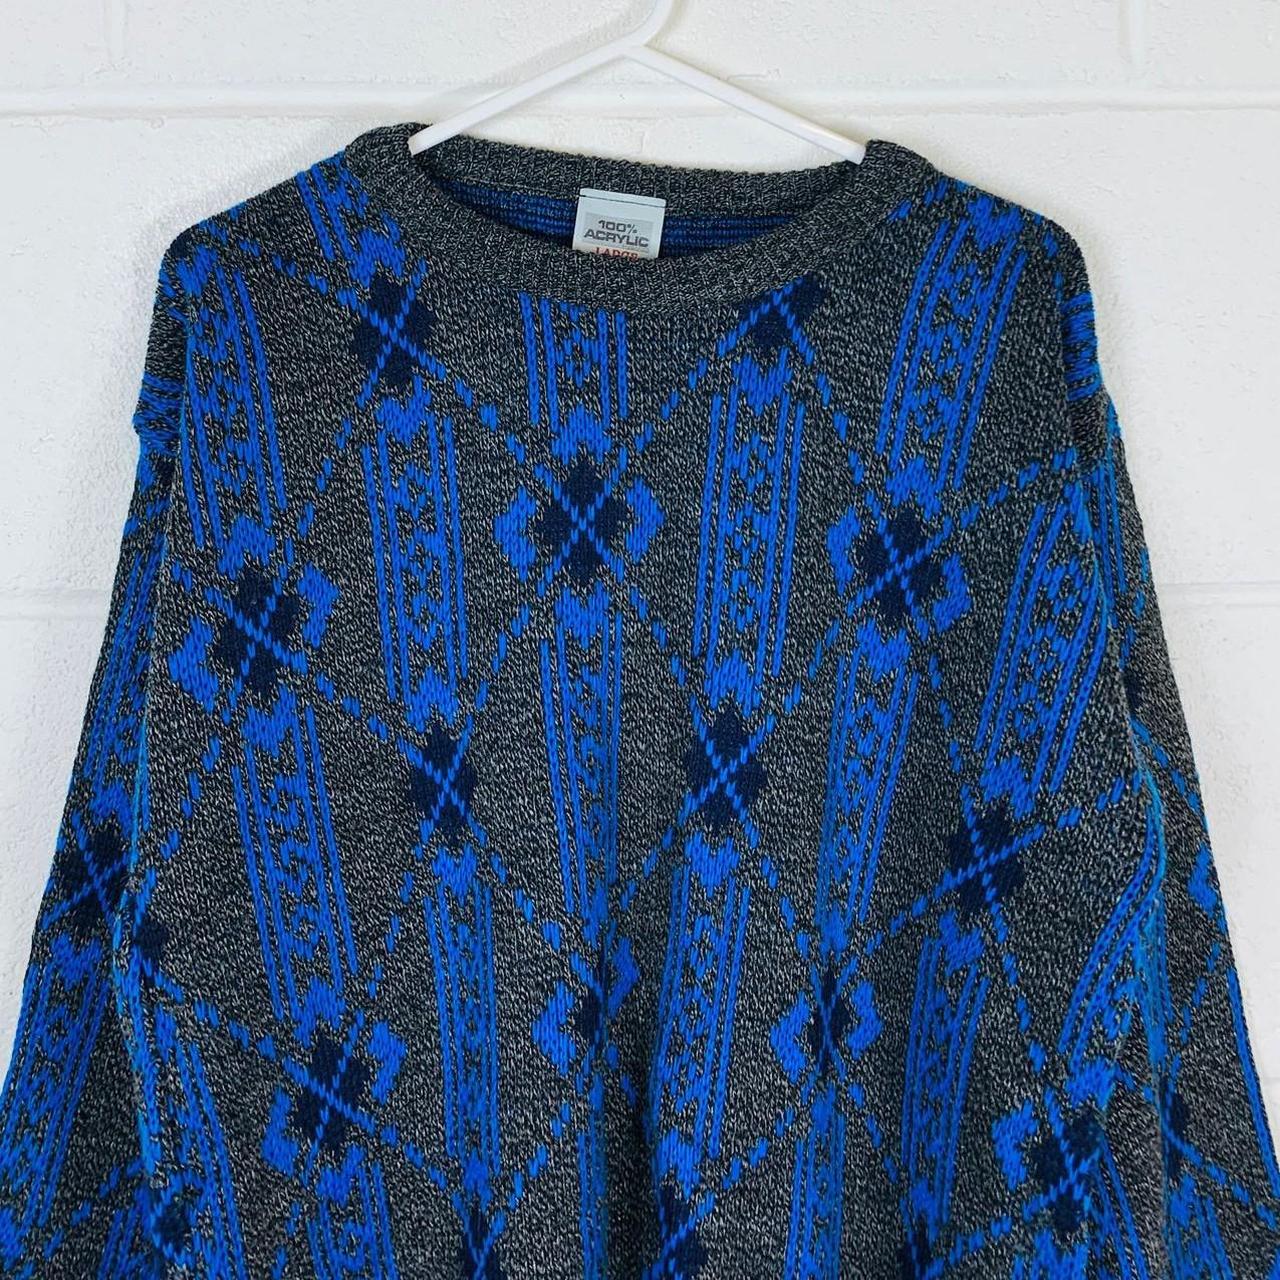 Product Image 1 - Vintage abstract knitted jumper

Blue and